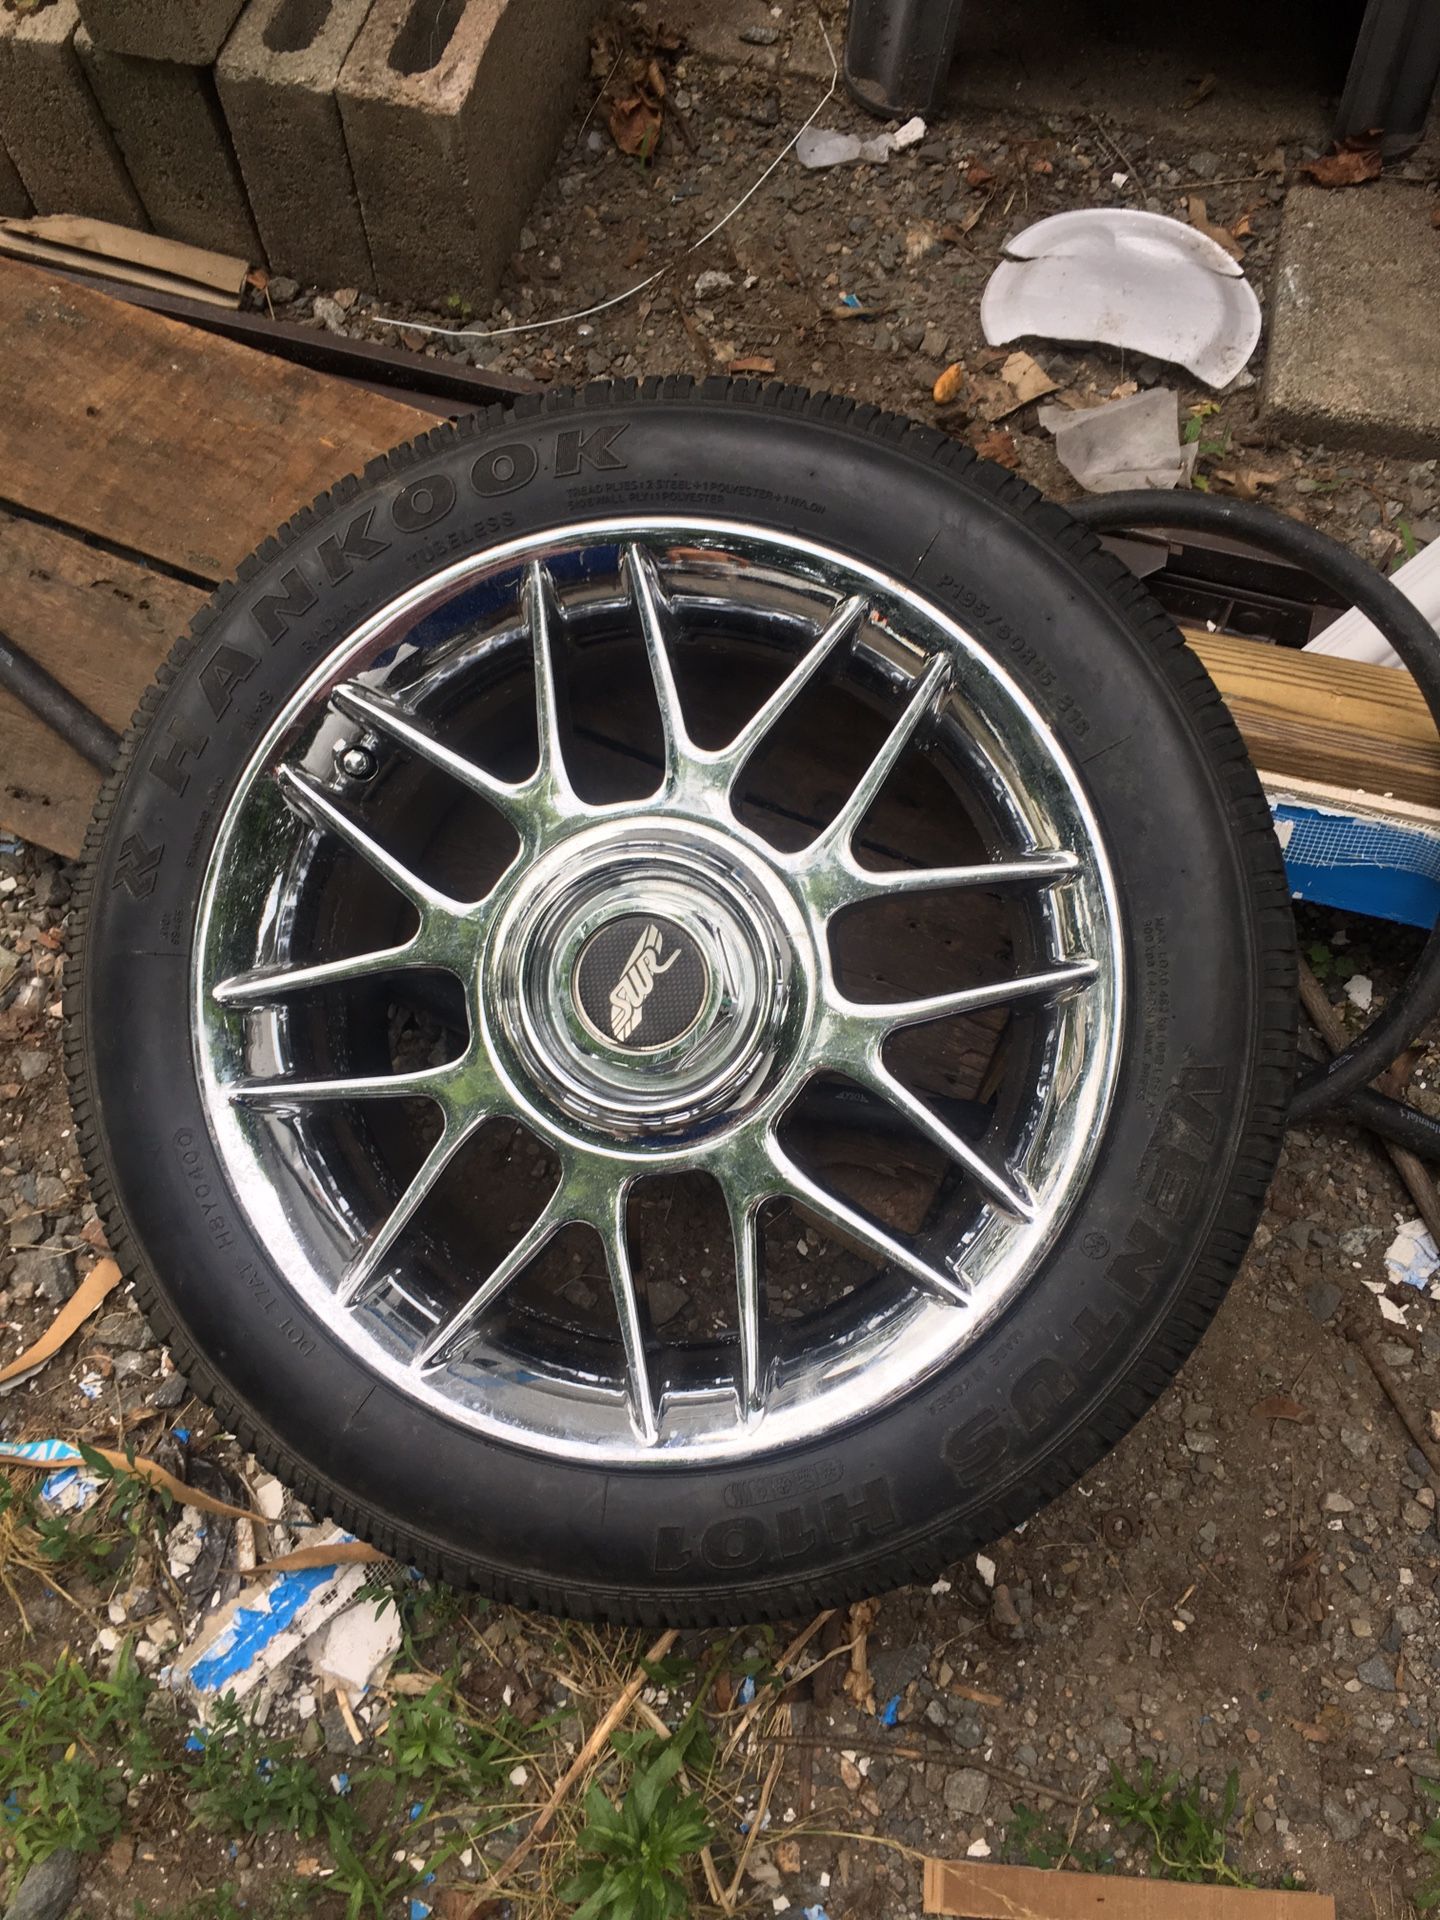 94-97 Toyota Corolla Rims and tires